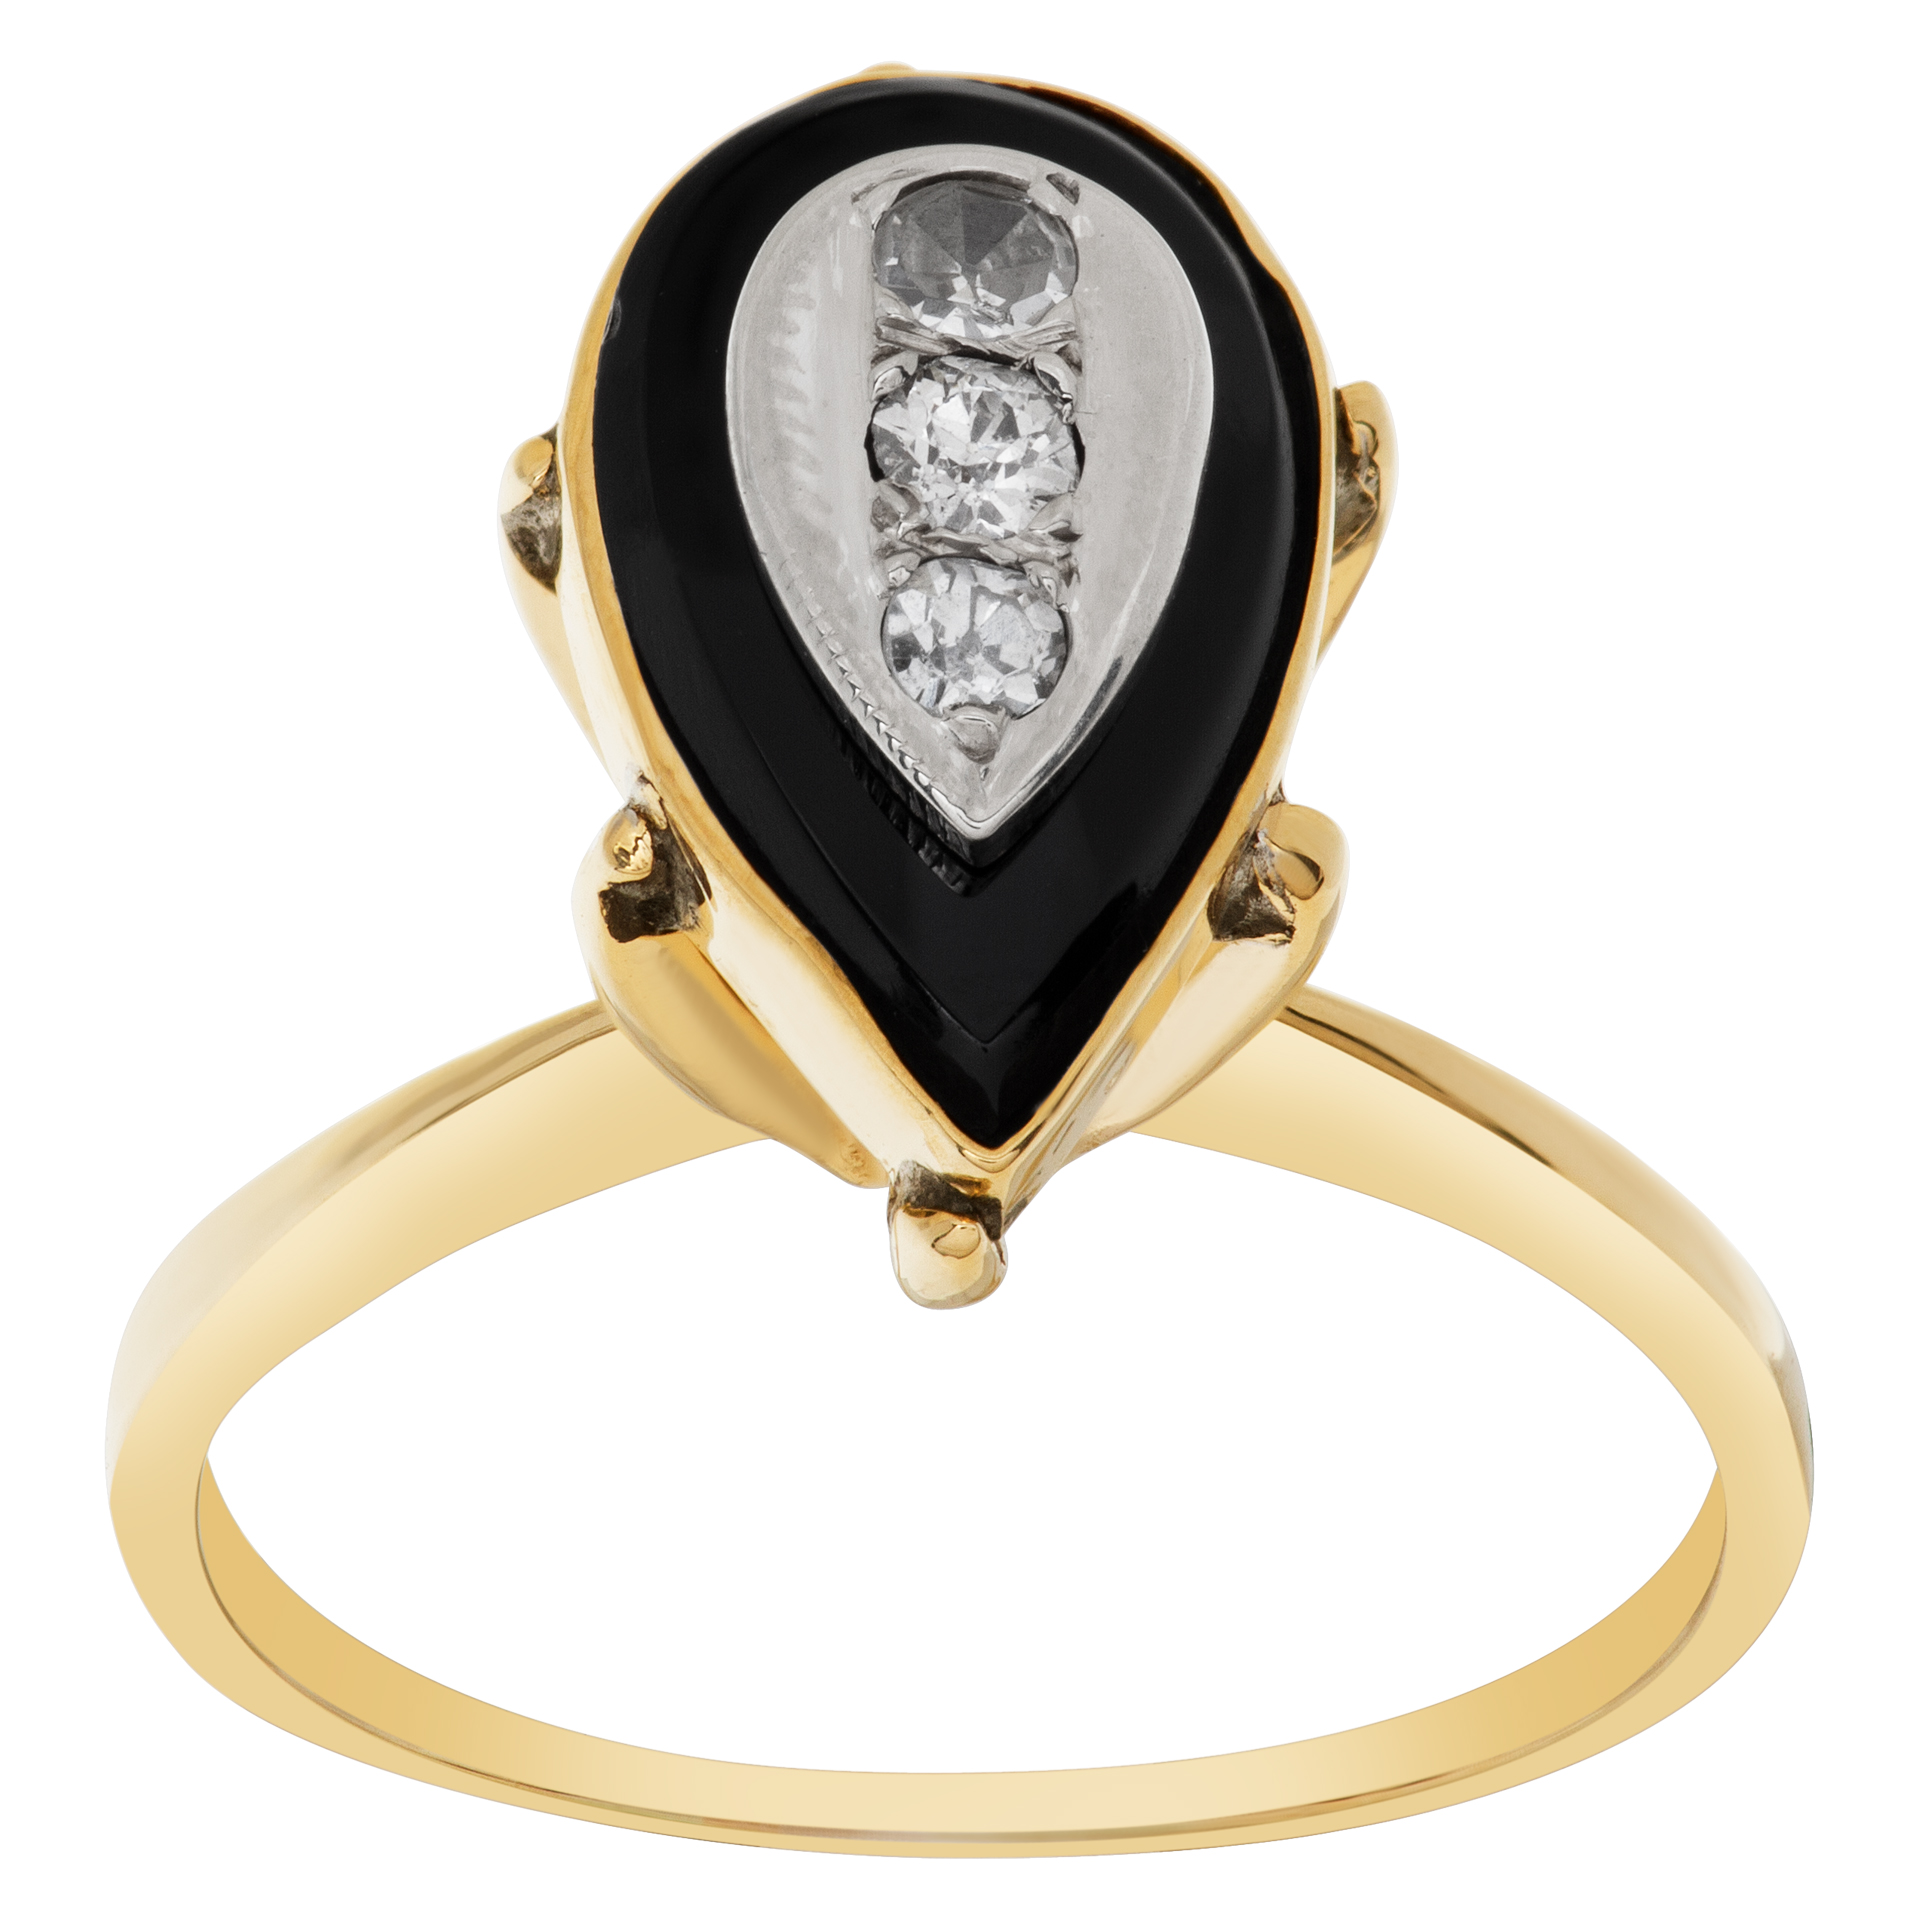 Diamond and onyx ring in 14k yellow gold